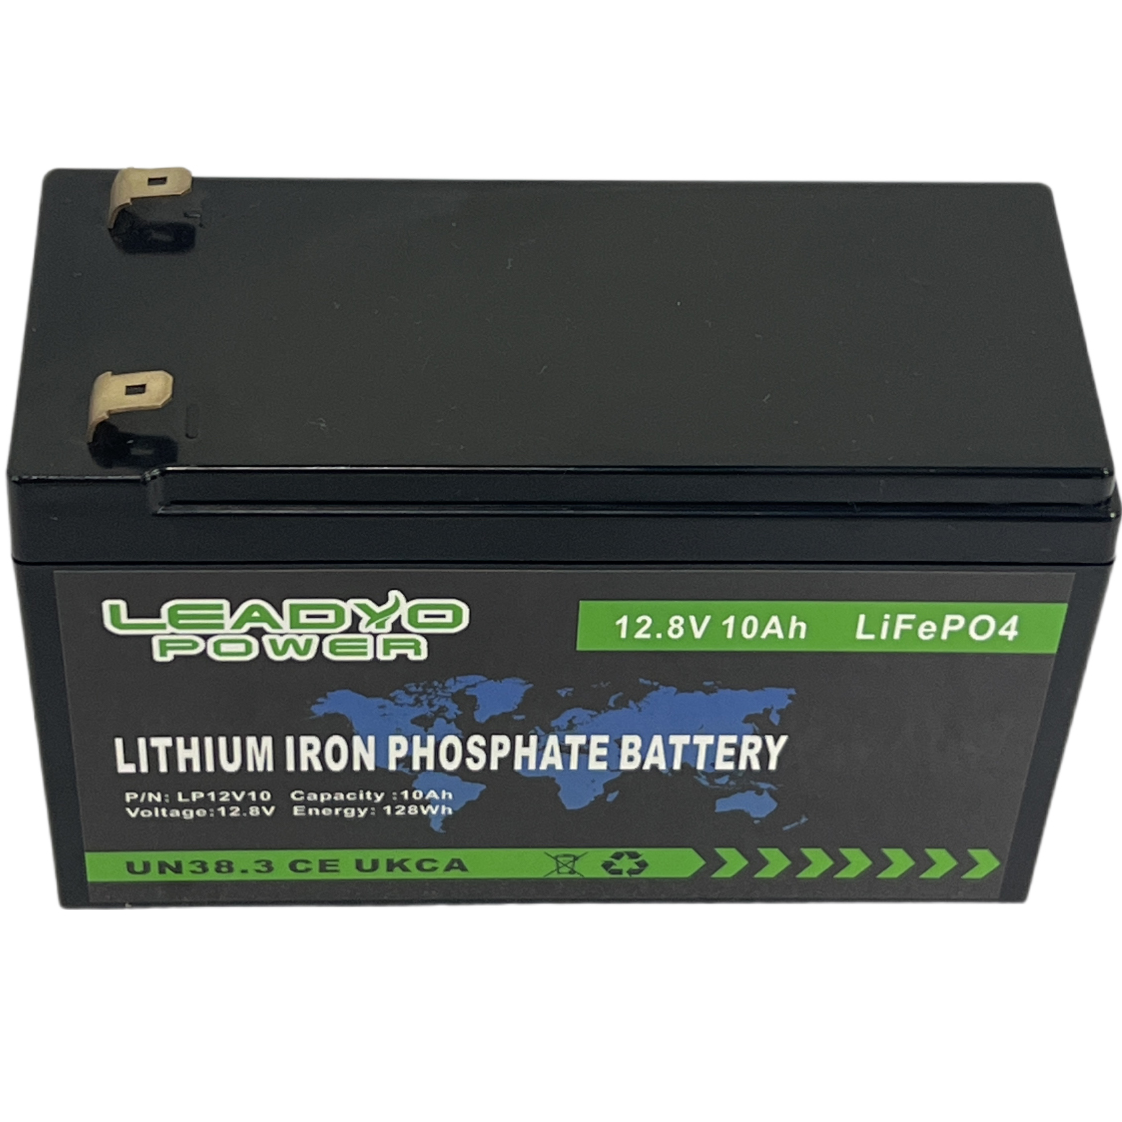 Leadyo Power: Your Premier Supplier of High-Quality Lifepo4 Batteries and Related Solutions